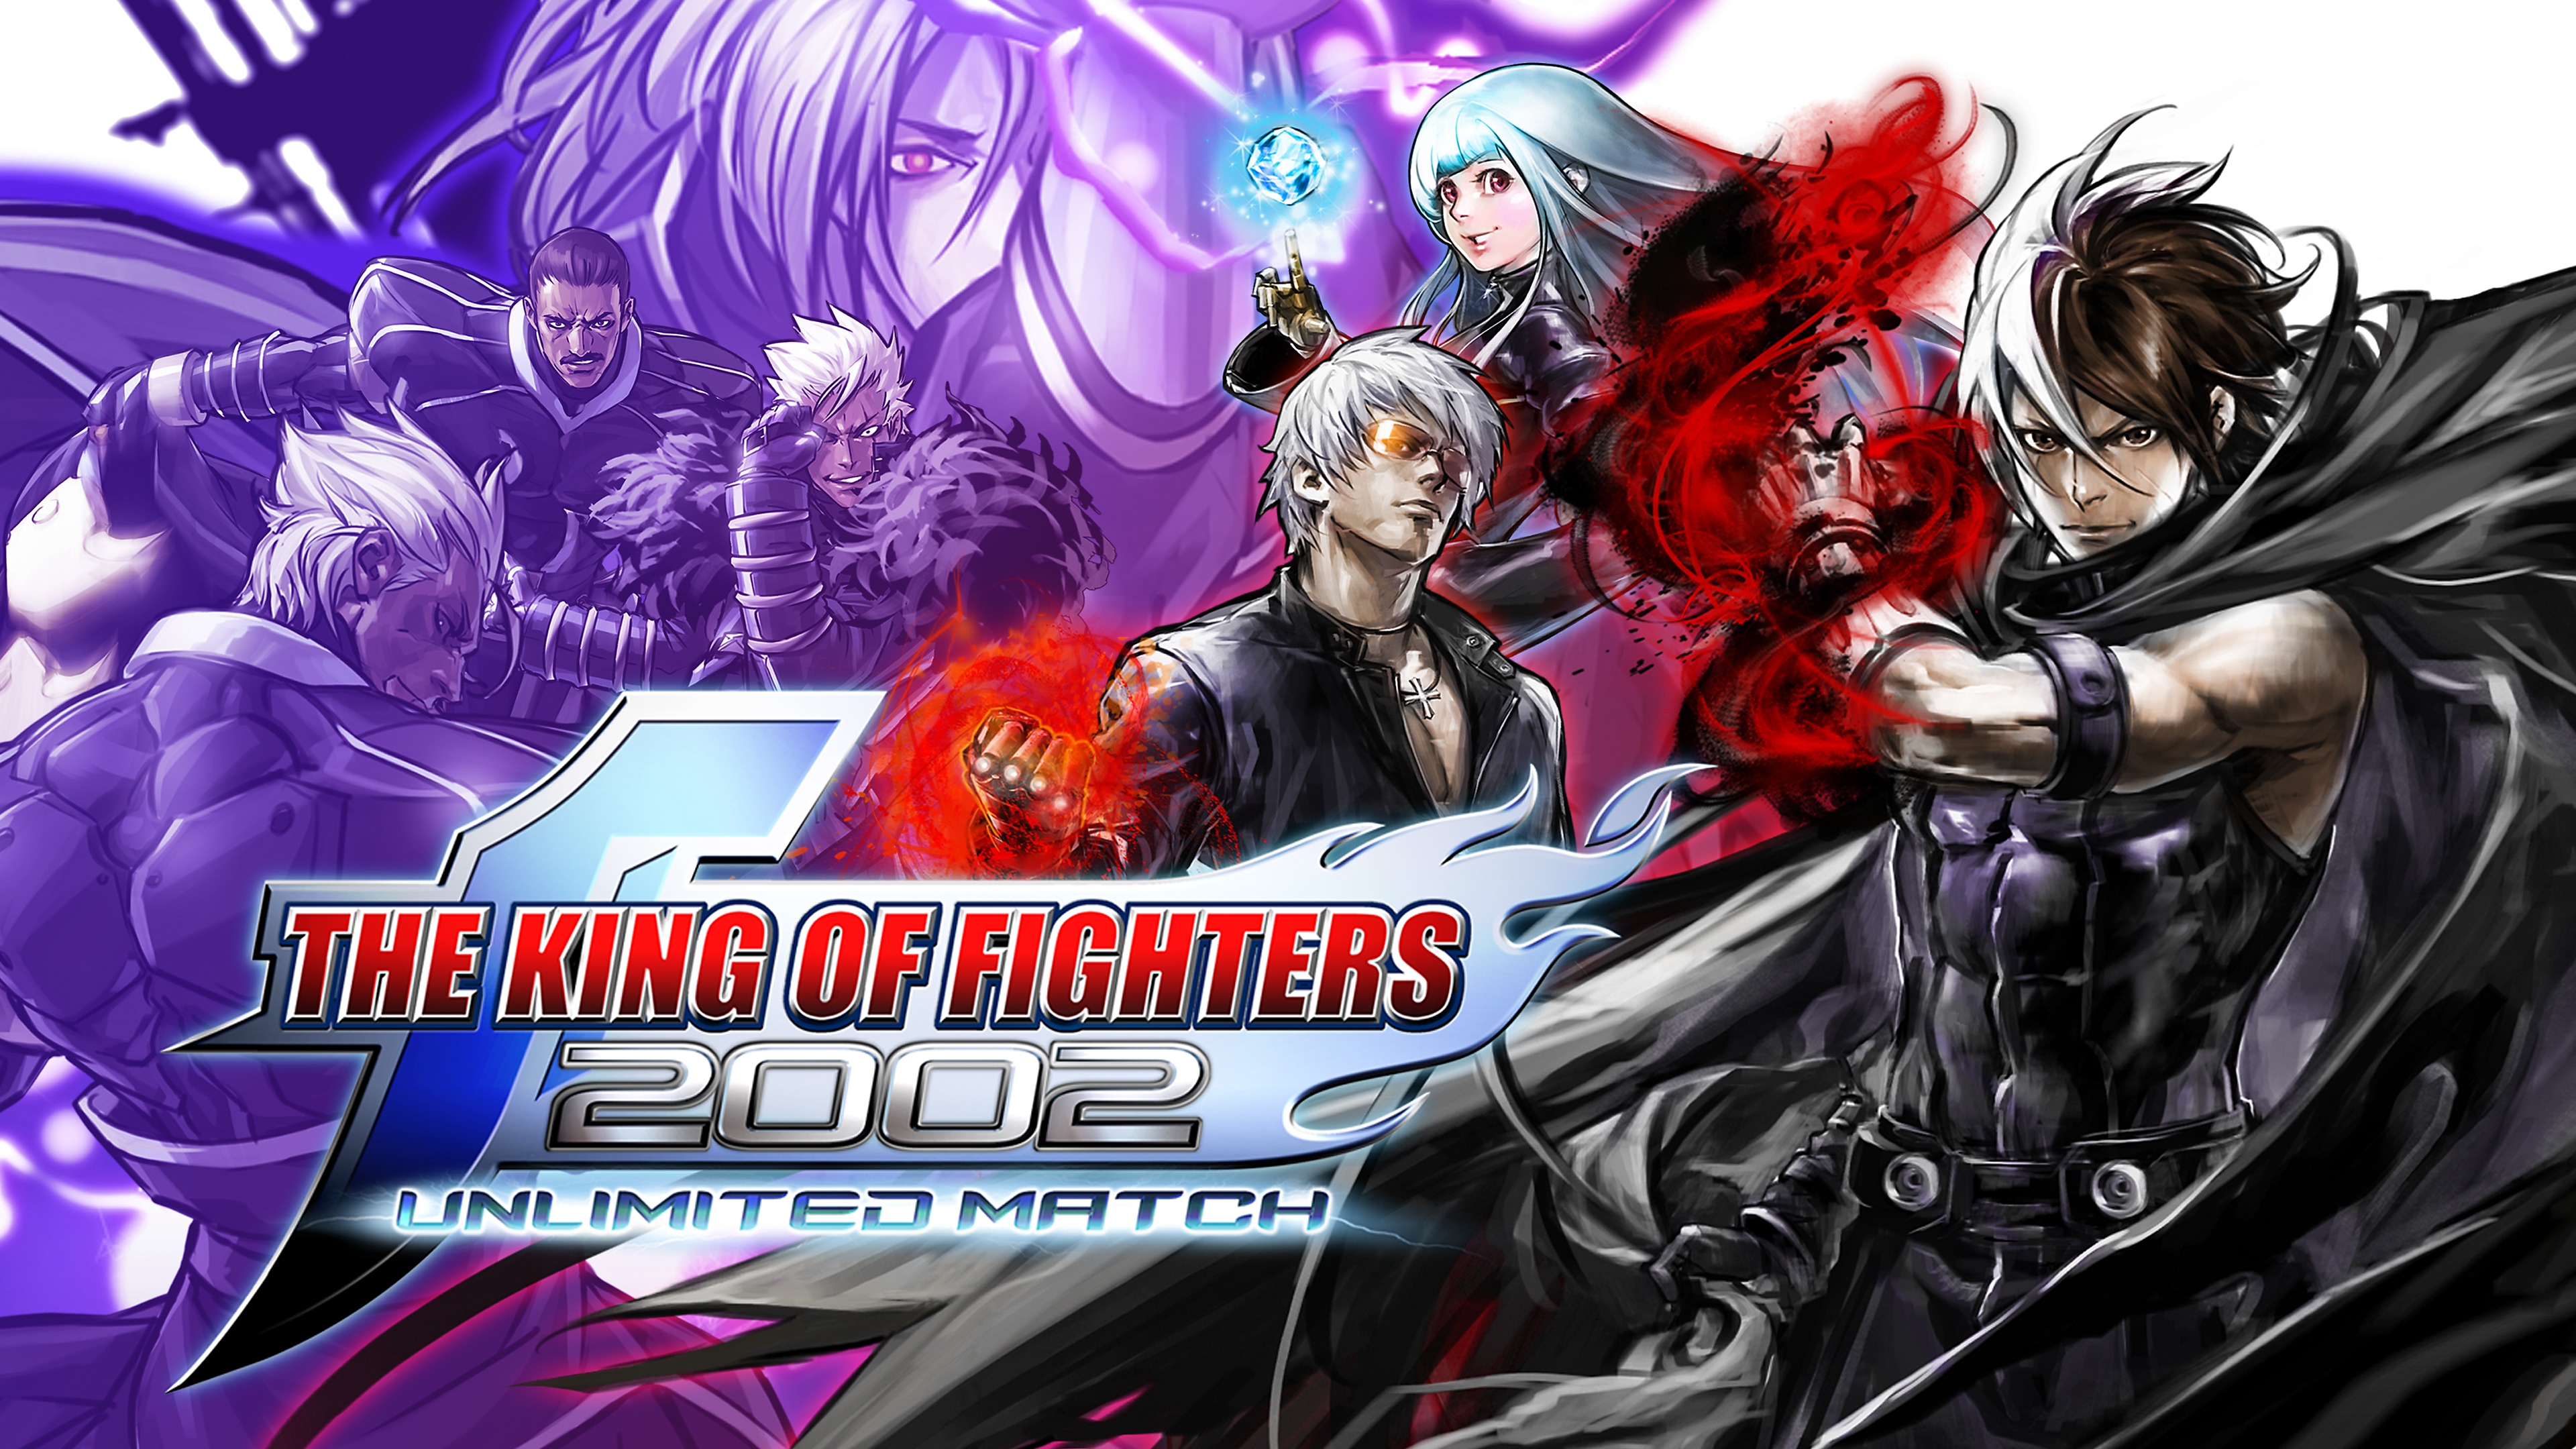 The King of Fighters 2002 - Unlimited Match arte guía